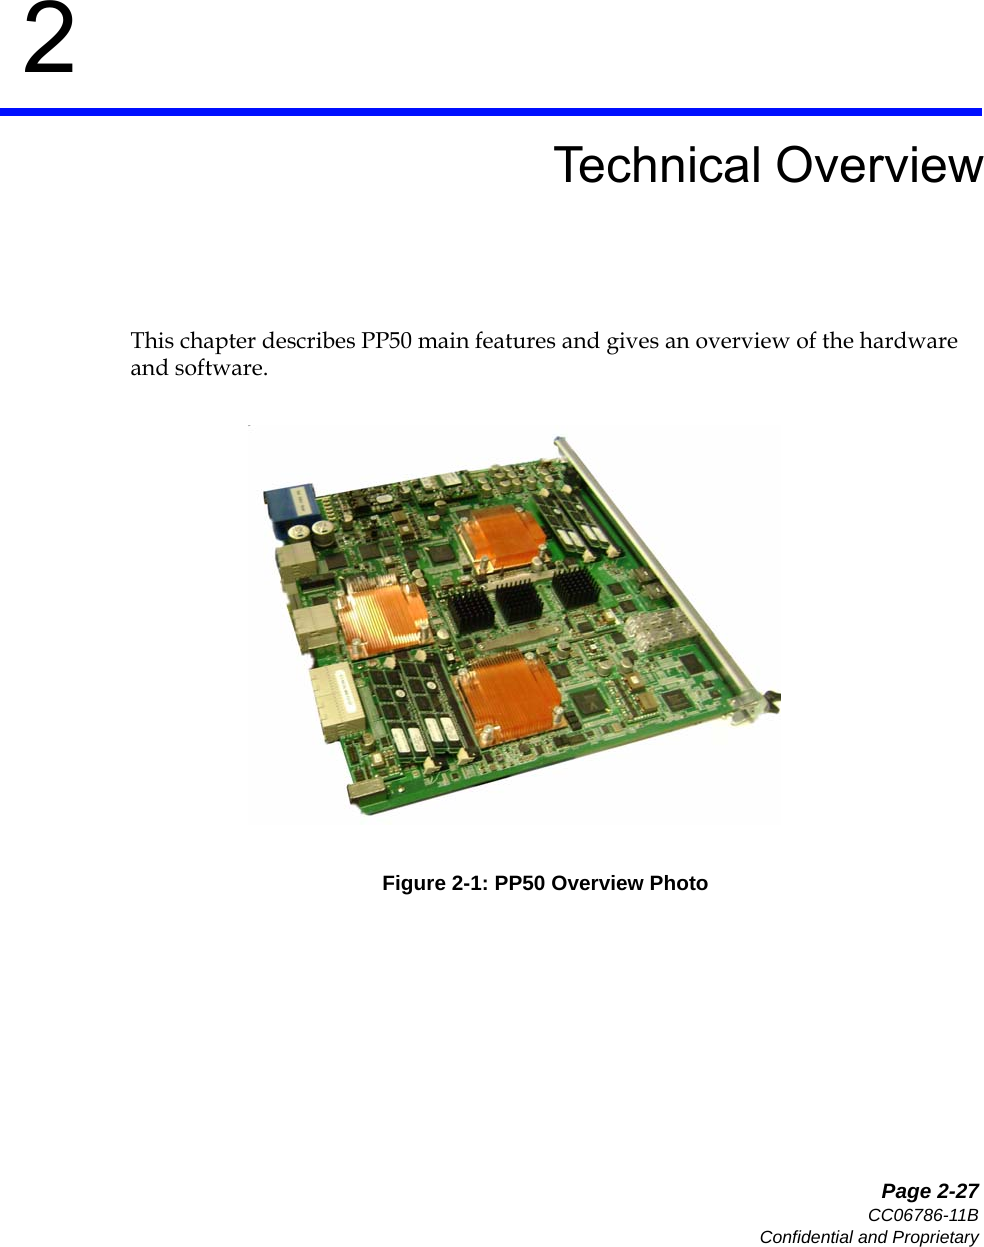   Page 2-27CC06786-11BConfidential and Proprietary2Preliminary2Technical OverviewThis chapter describes PP50 main features and gives an overview of the hardware and software.Figure 2-1: PP50 Overview Photo